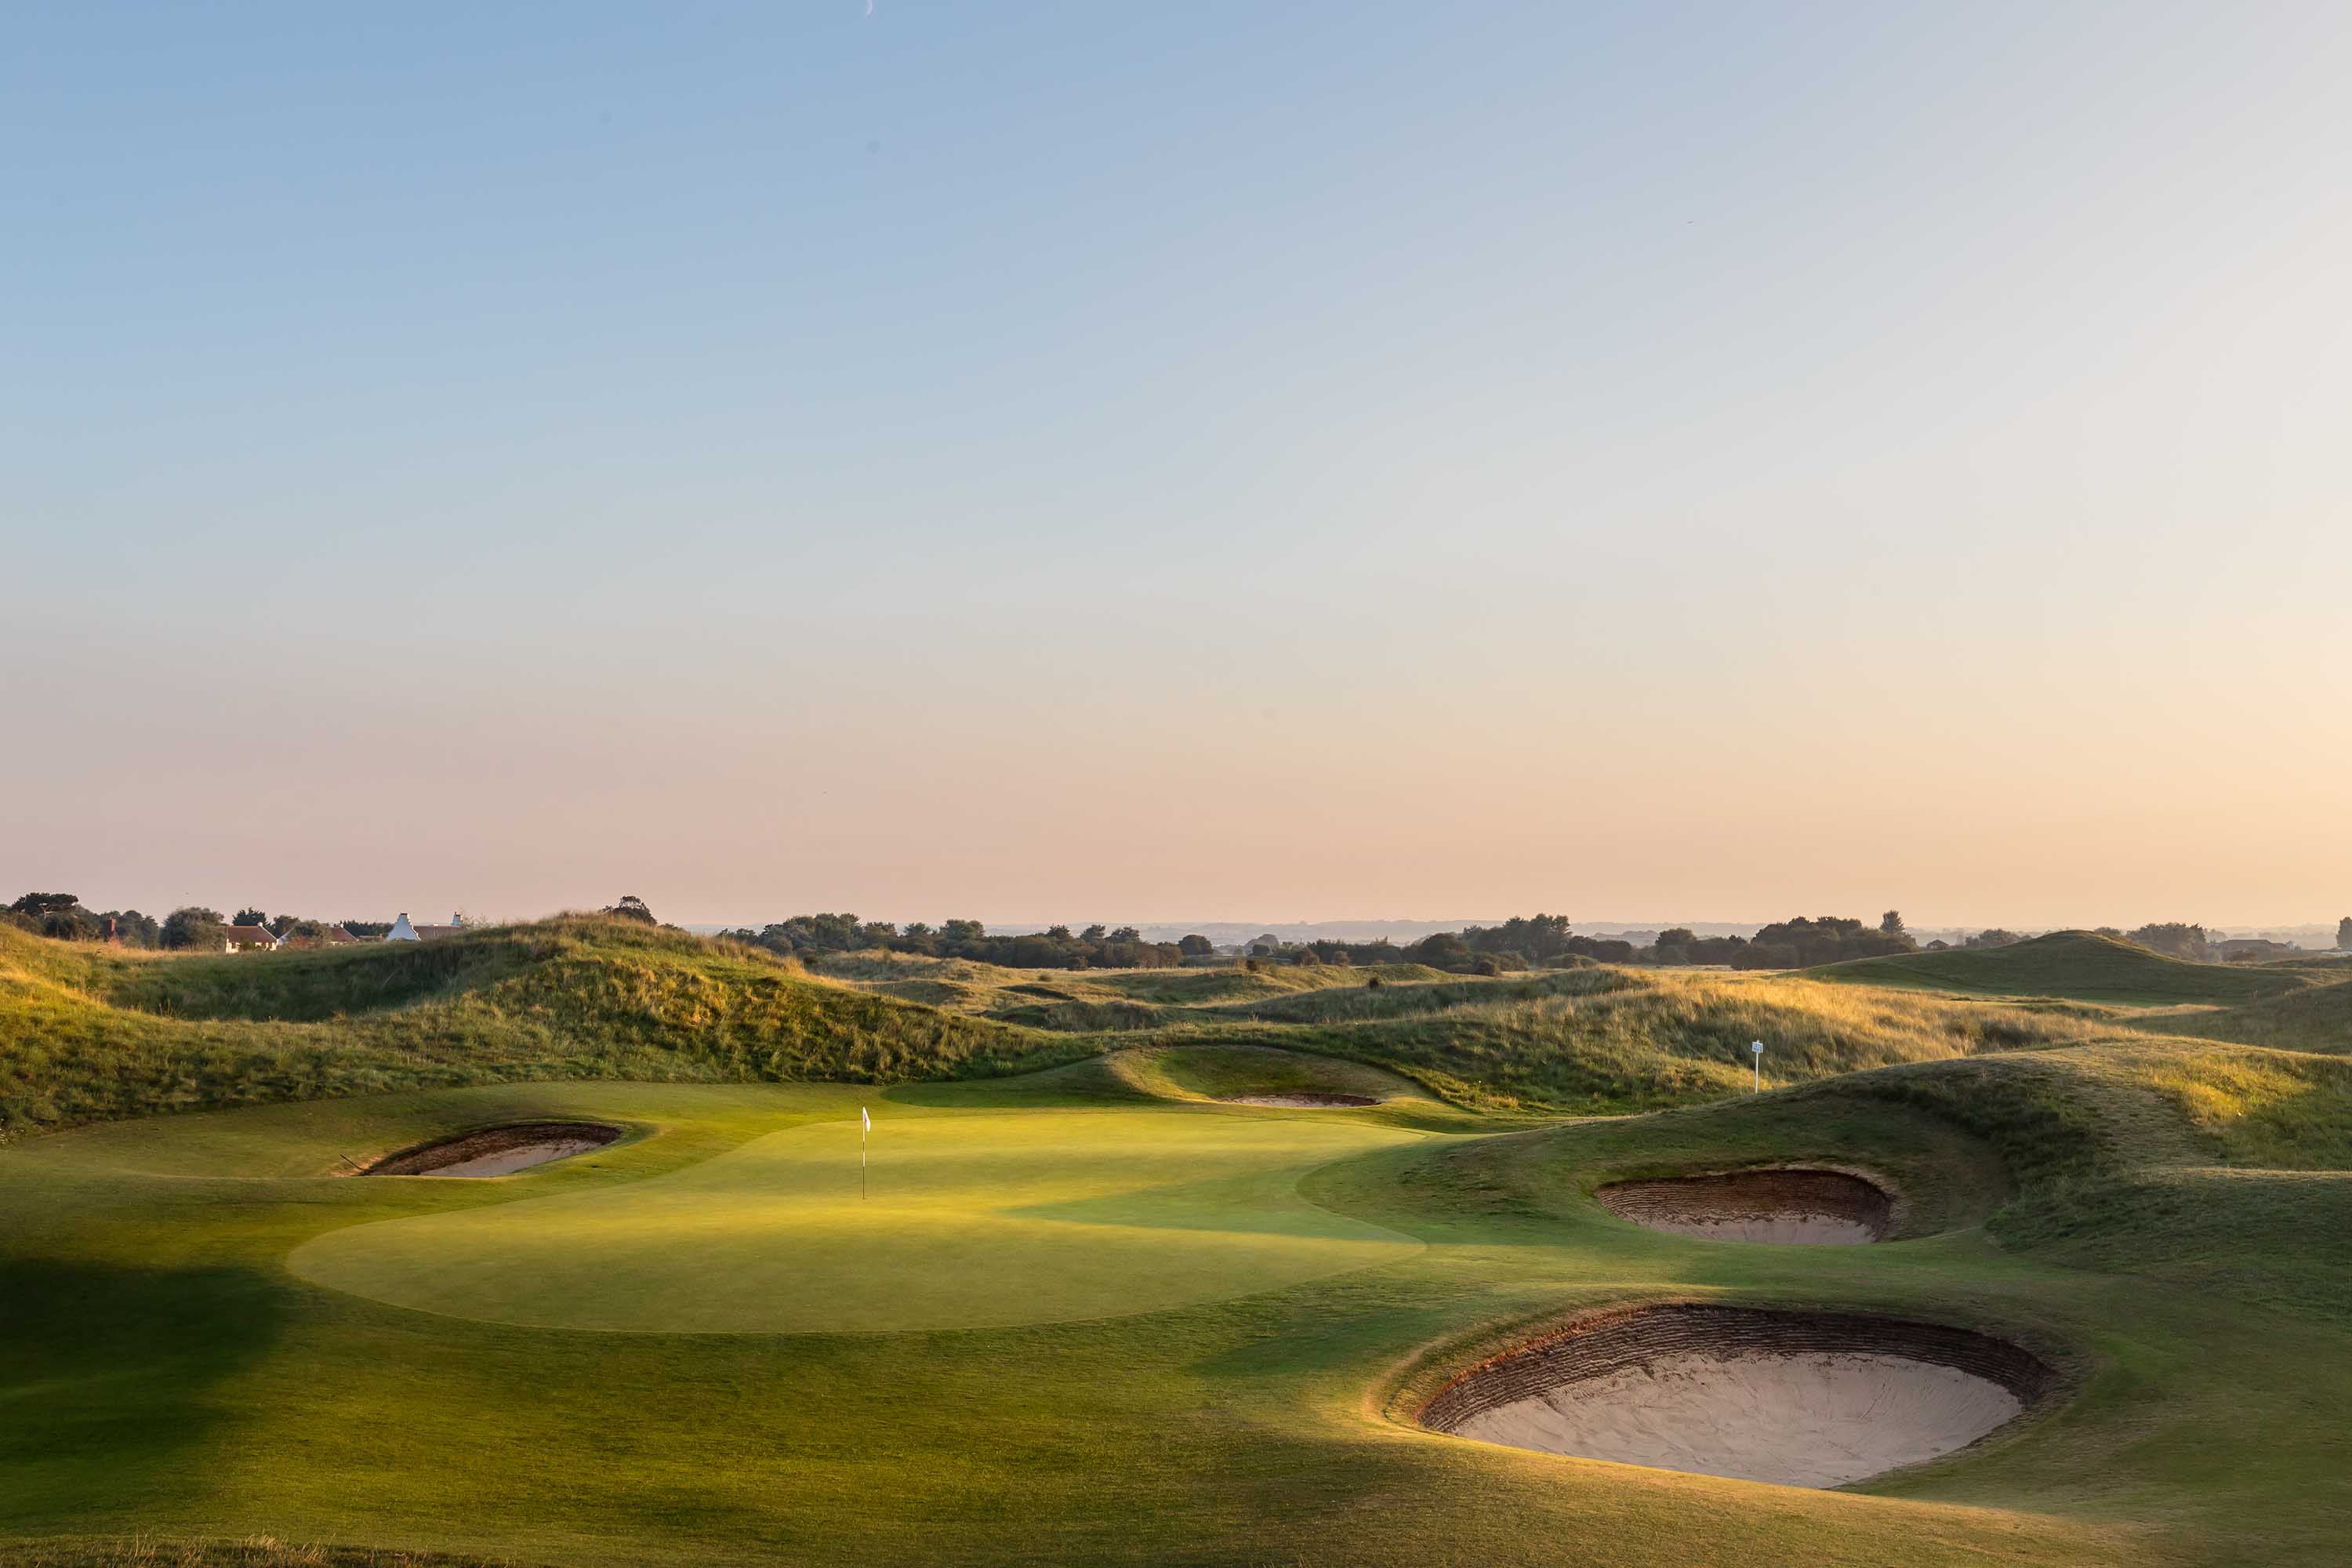 7 Things to See at Royal St. George's - H&B England Golf Trips